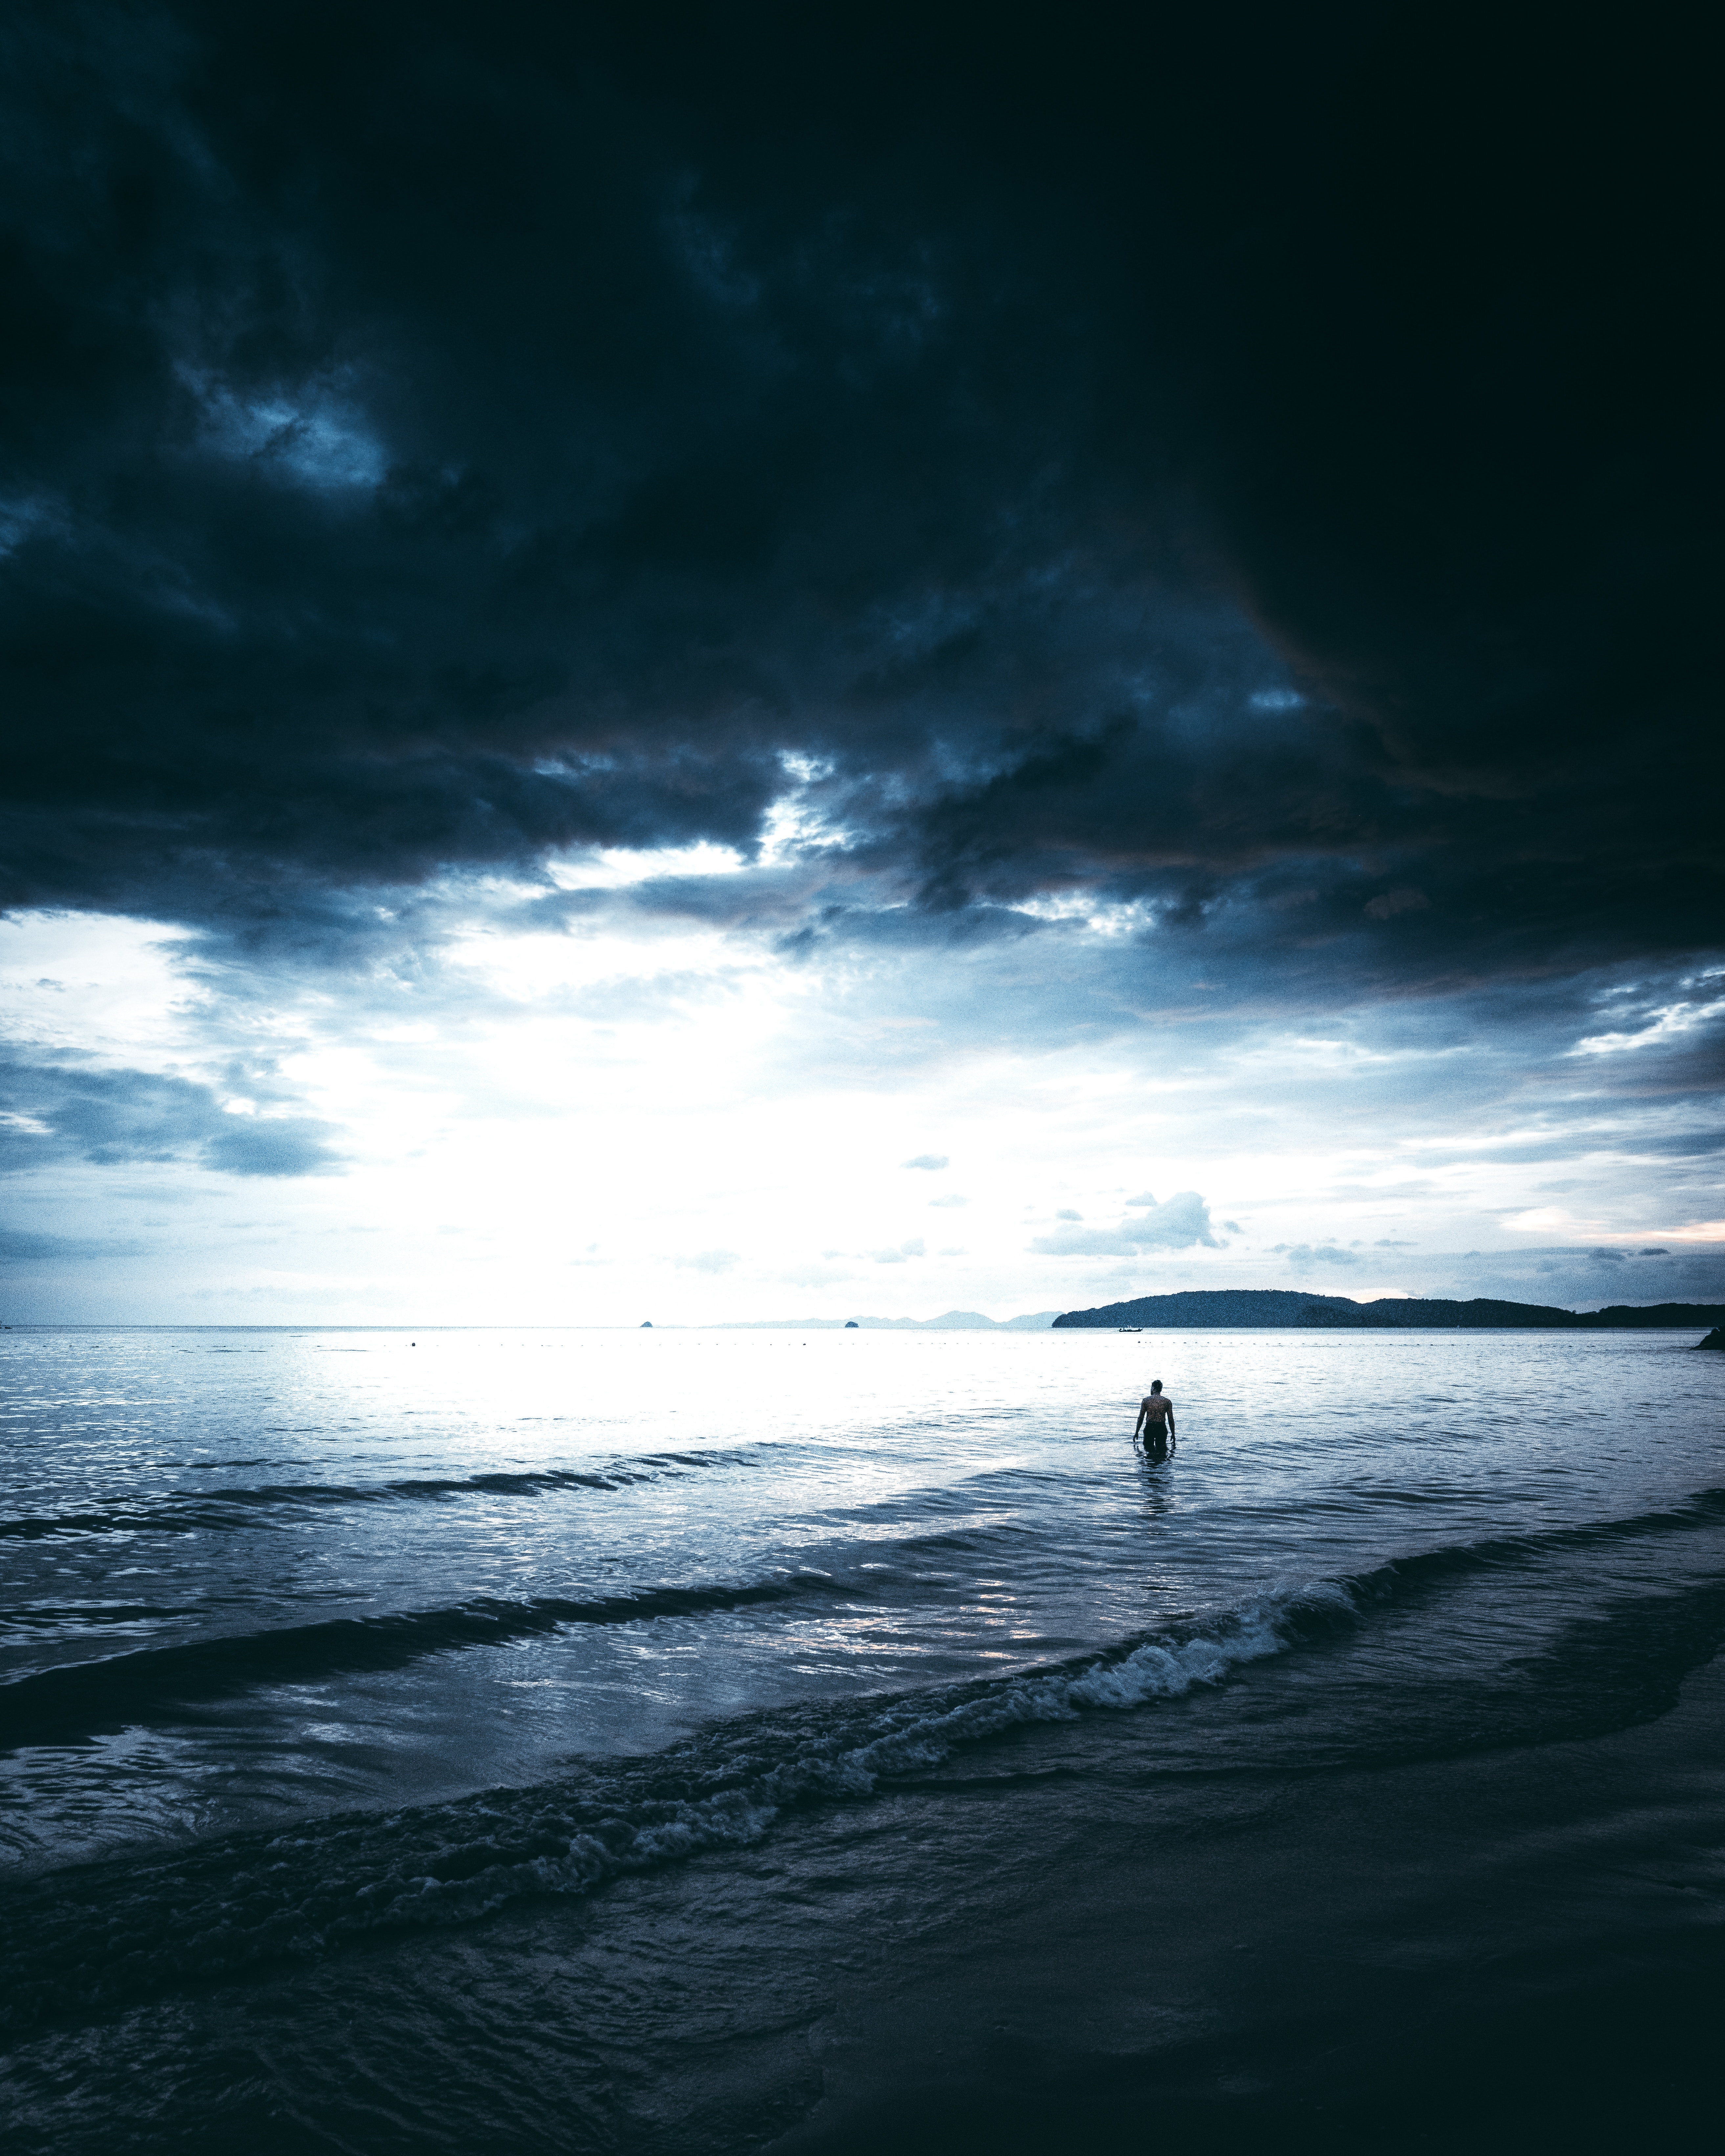 lonely, nature, sea, clouds, human, person, mainly cloudy, overcast, alone wallpaper for mobile